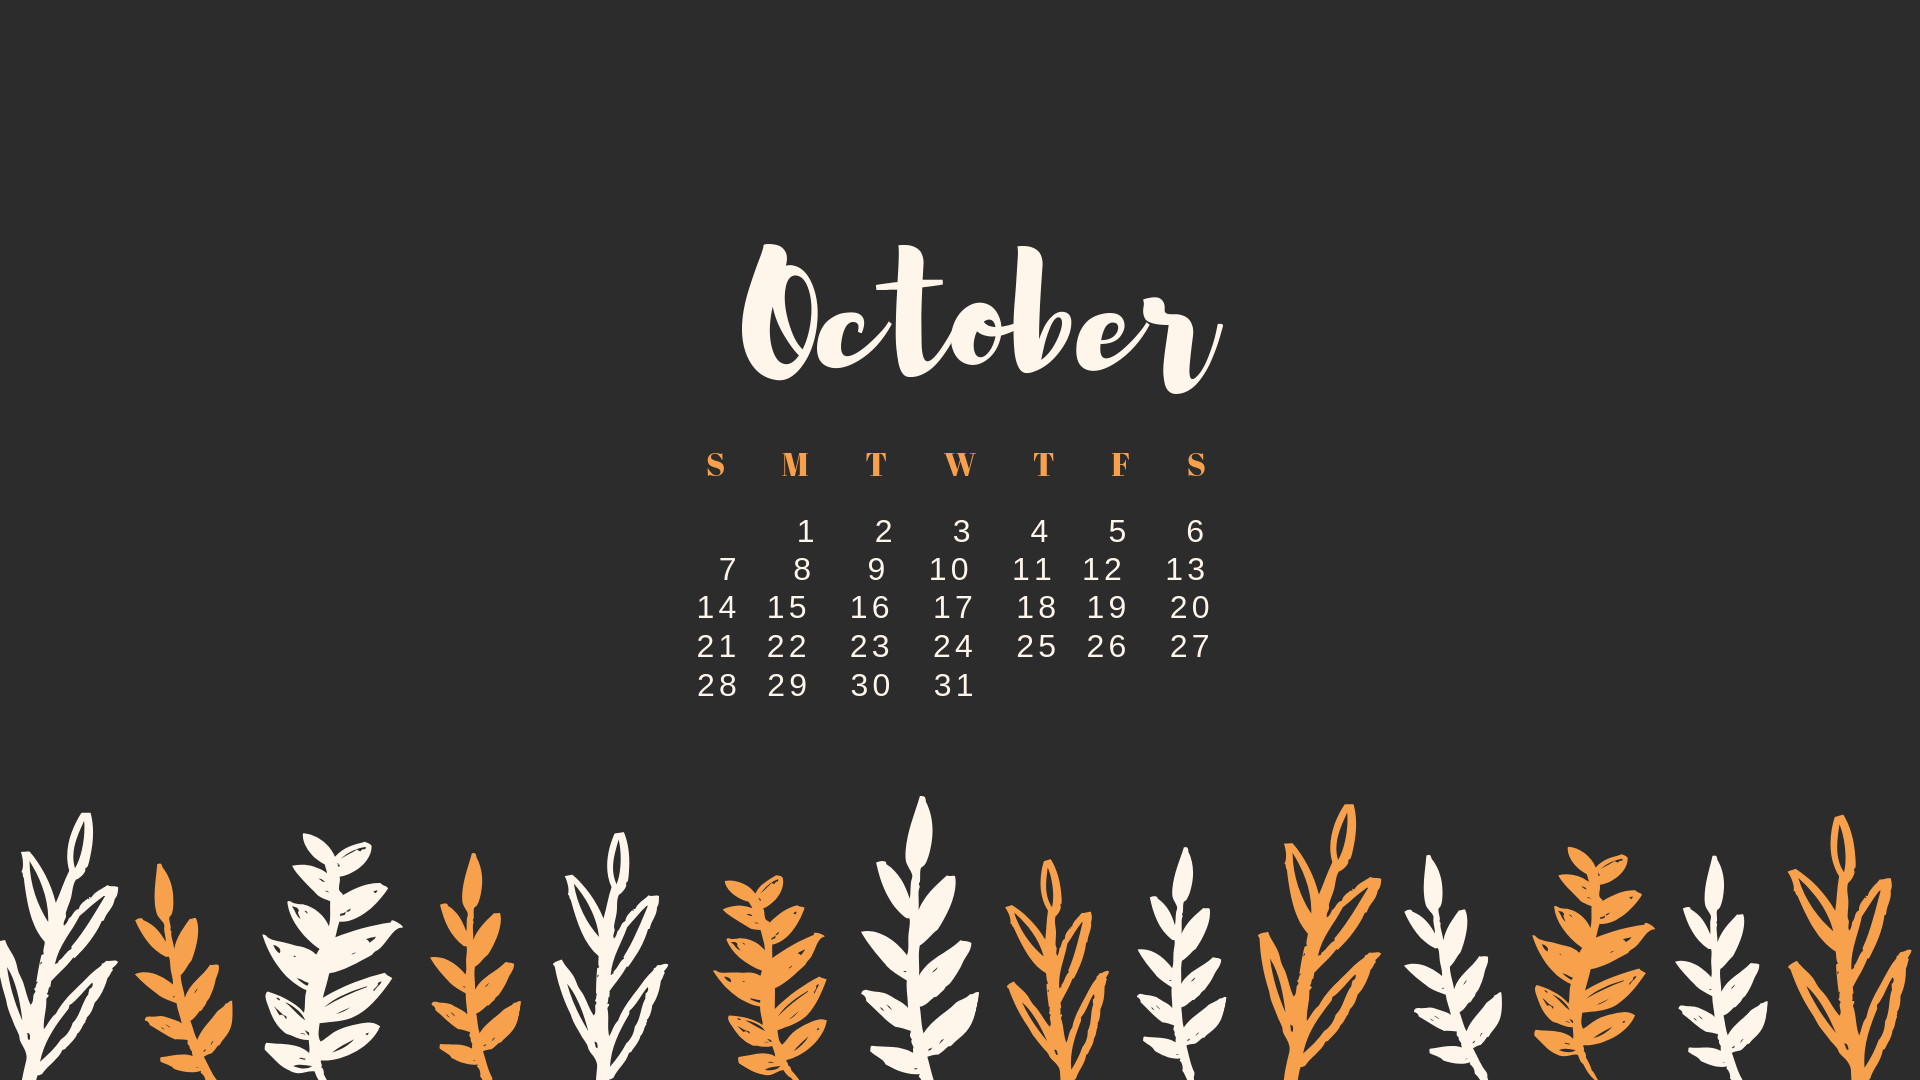 October s on